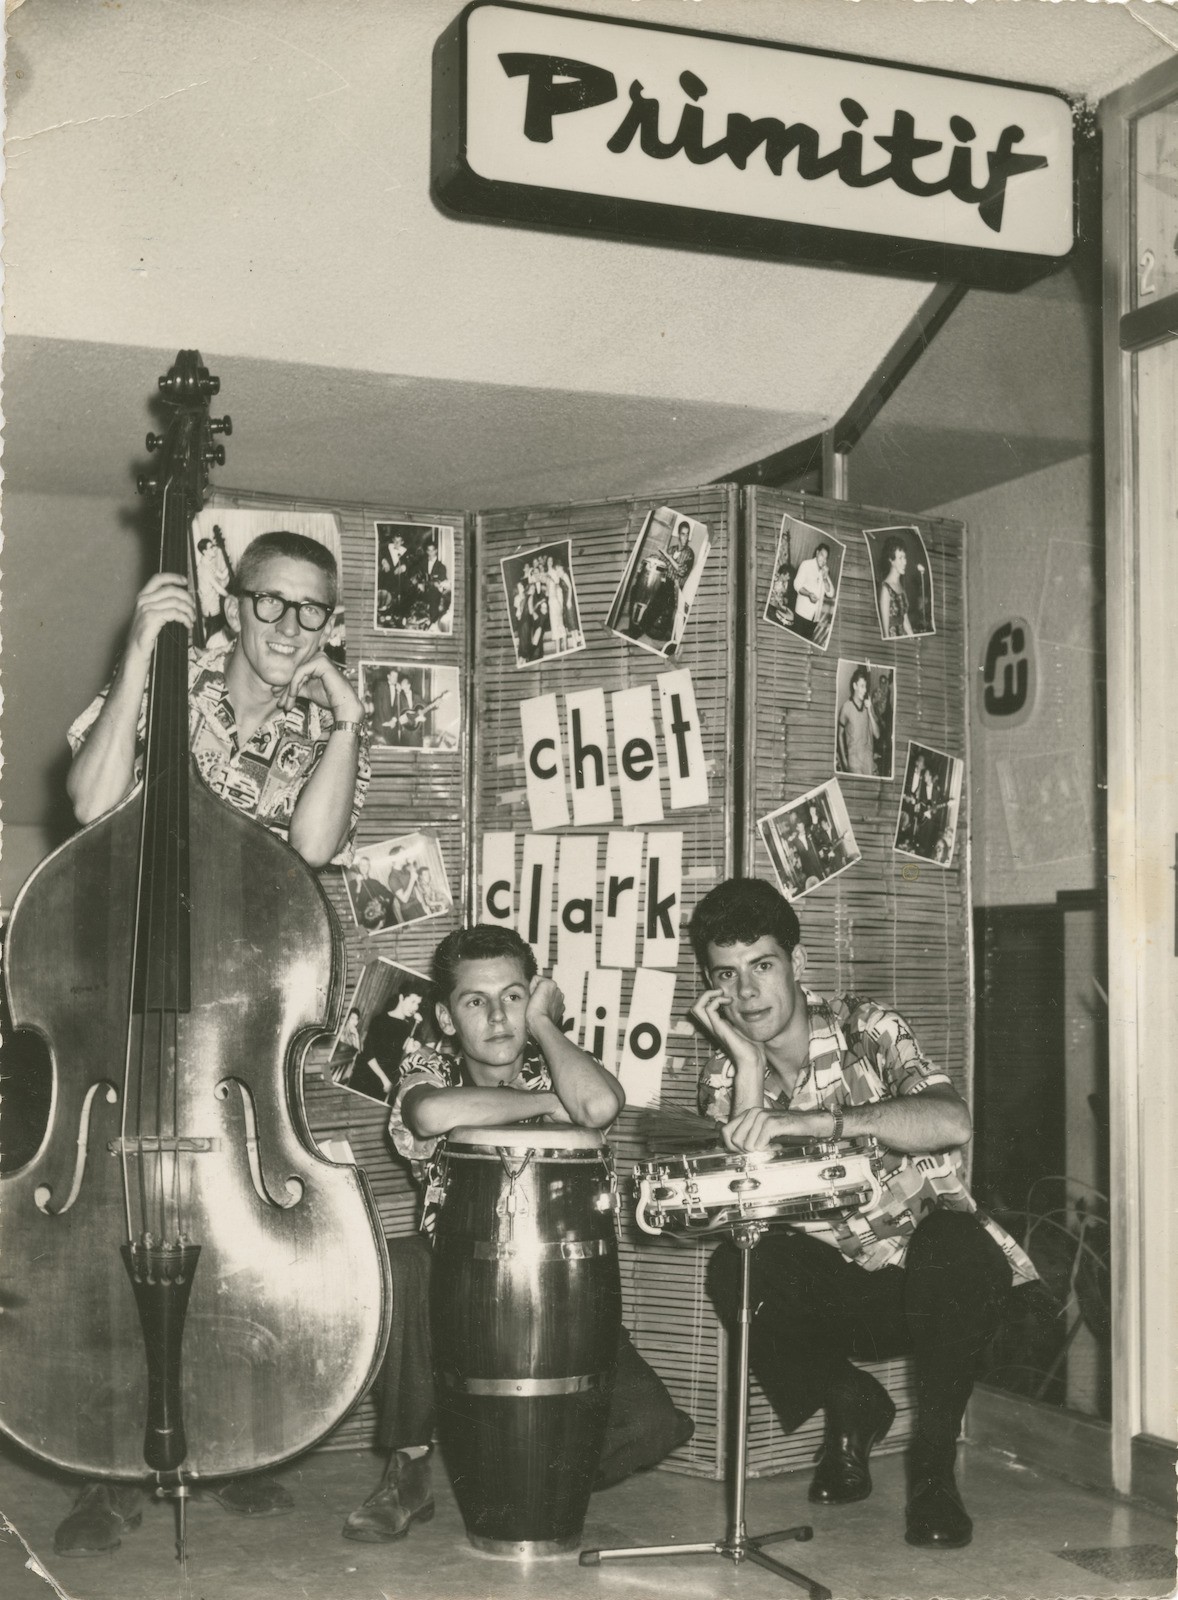 Chet Clark Trio posing with their musical instruments on stage at the Primitif Cafe in Brisbane 